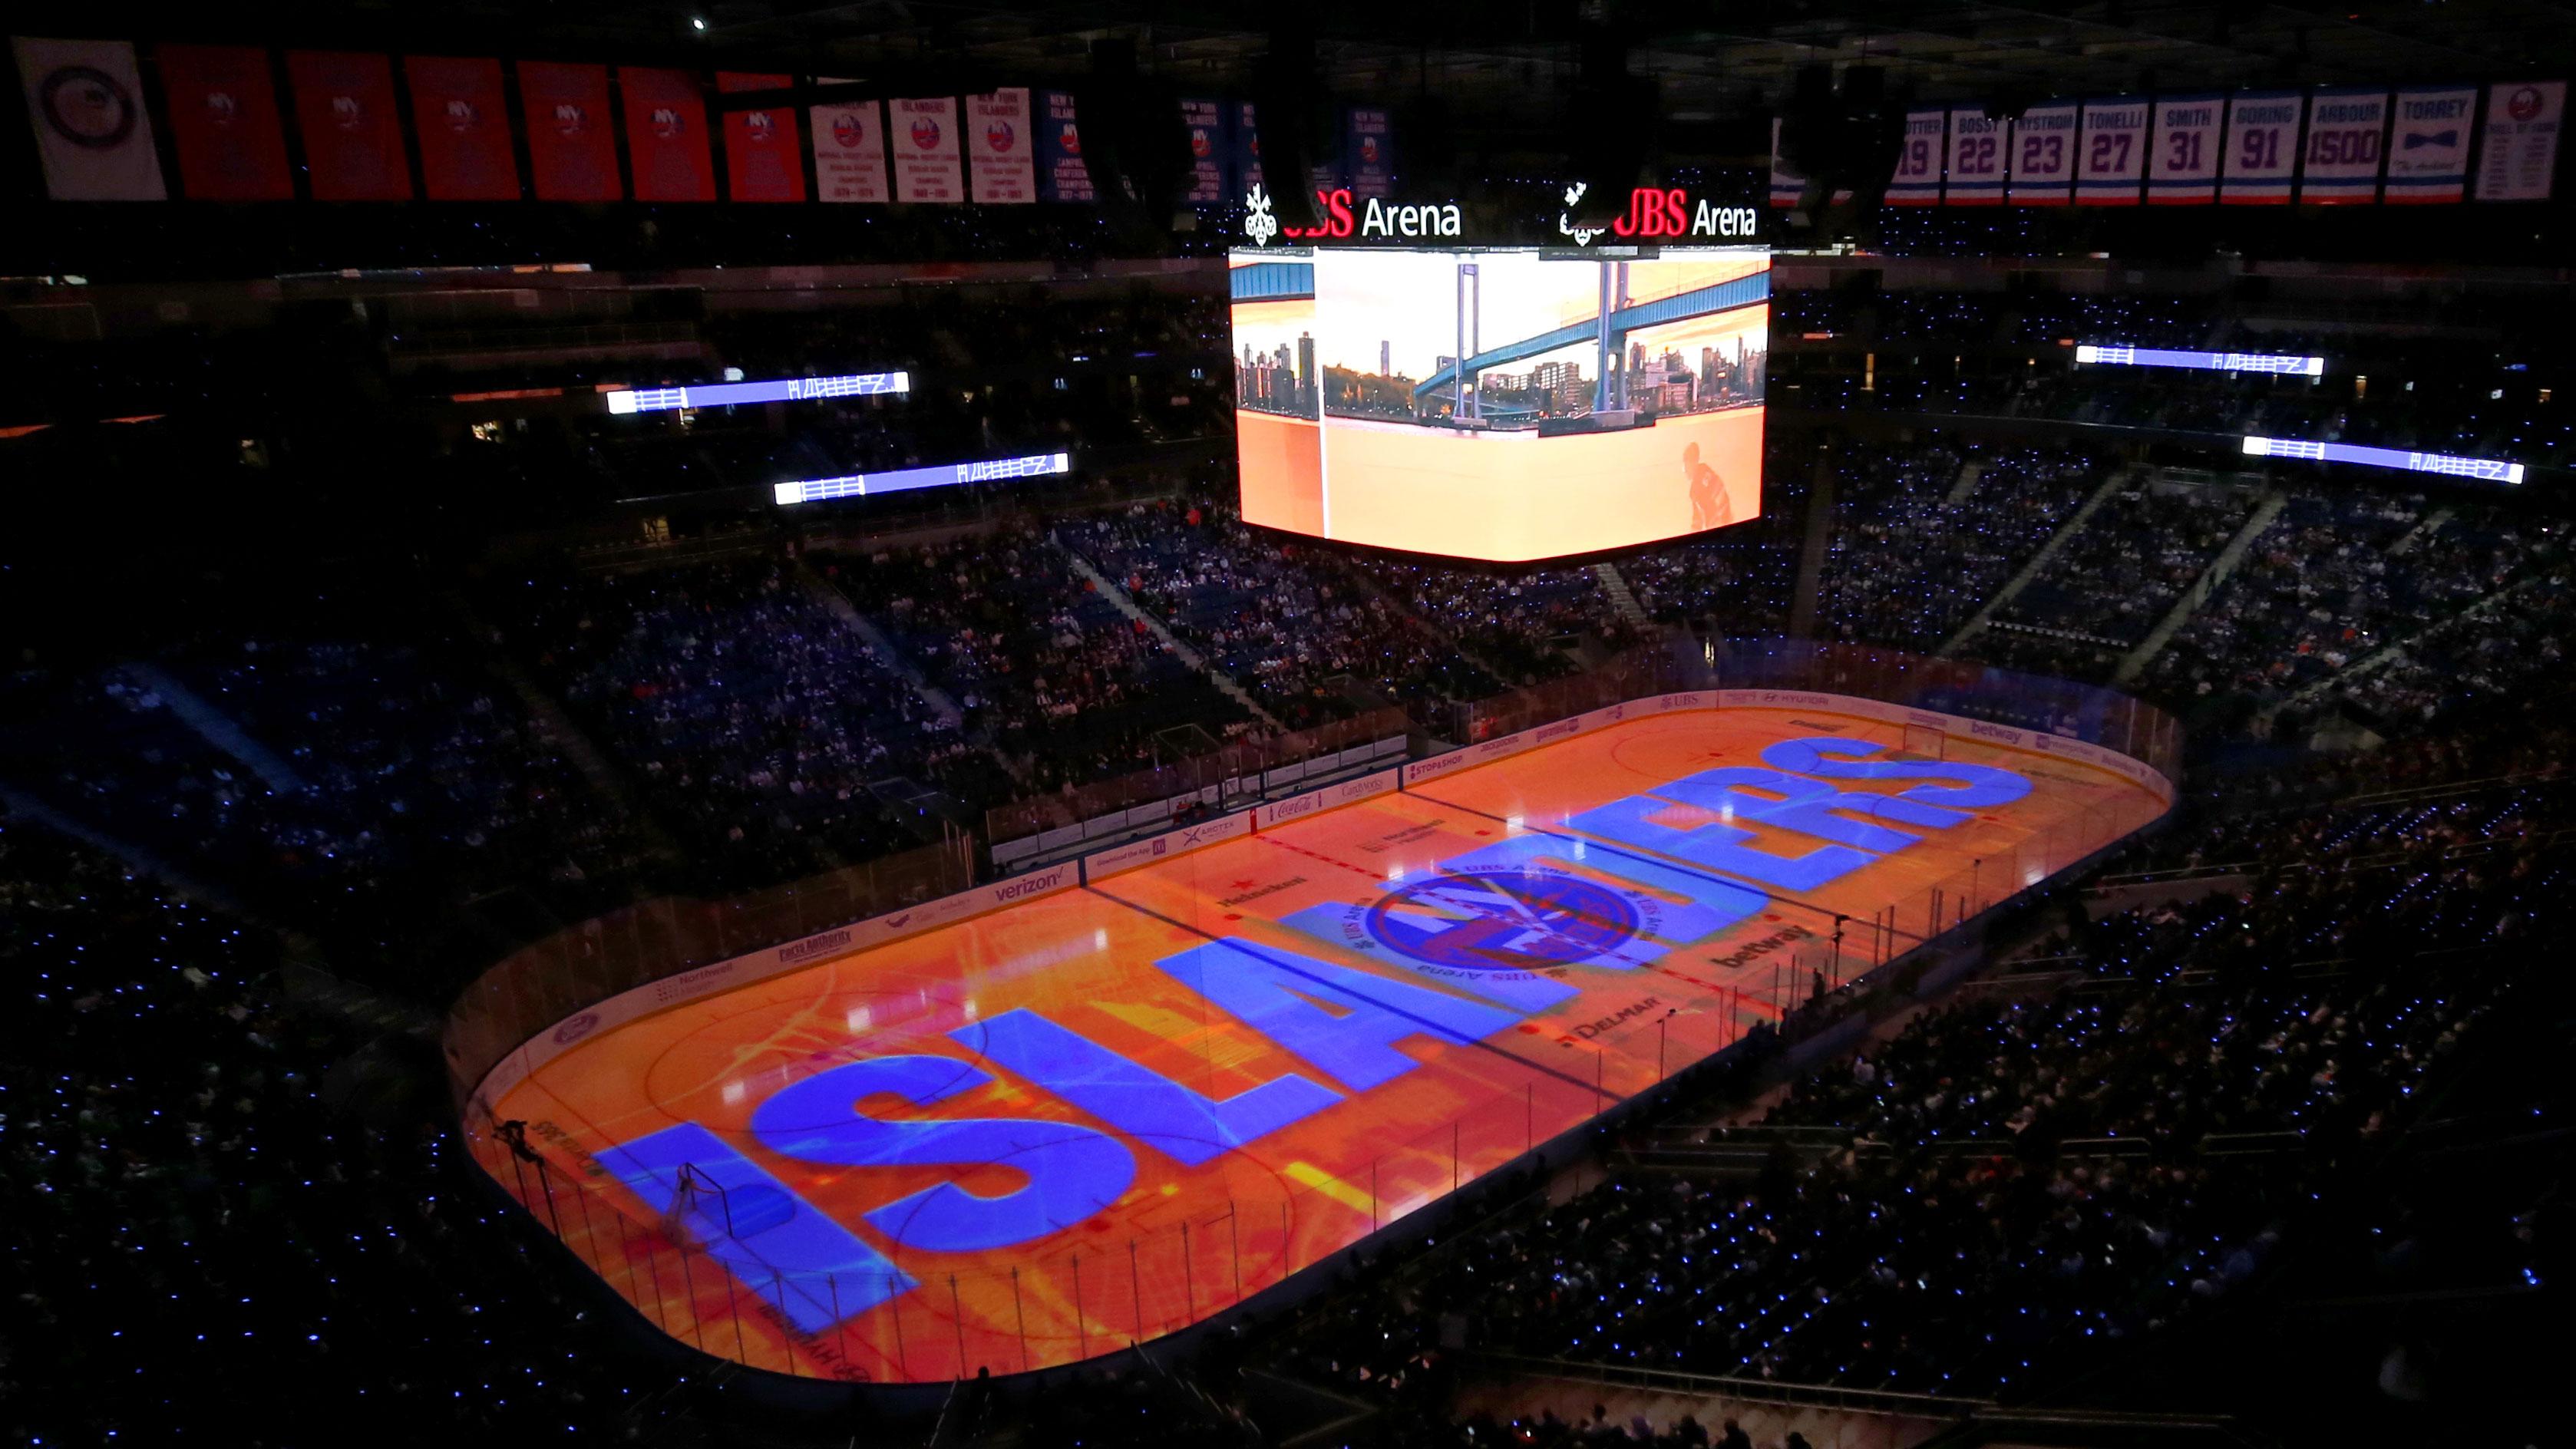 Nov 26, 2021; Elmont, New York, USA; General view of UBS Arena before a game between the New York Islanders and the Pittsburgh Penguins. / Brad Penner-USA TODAY Sports